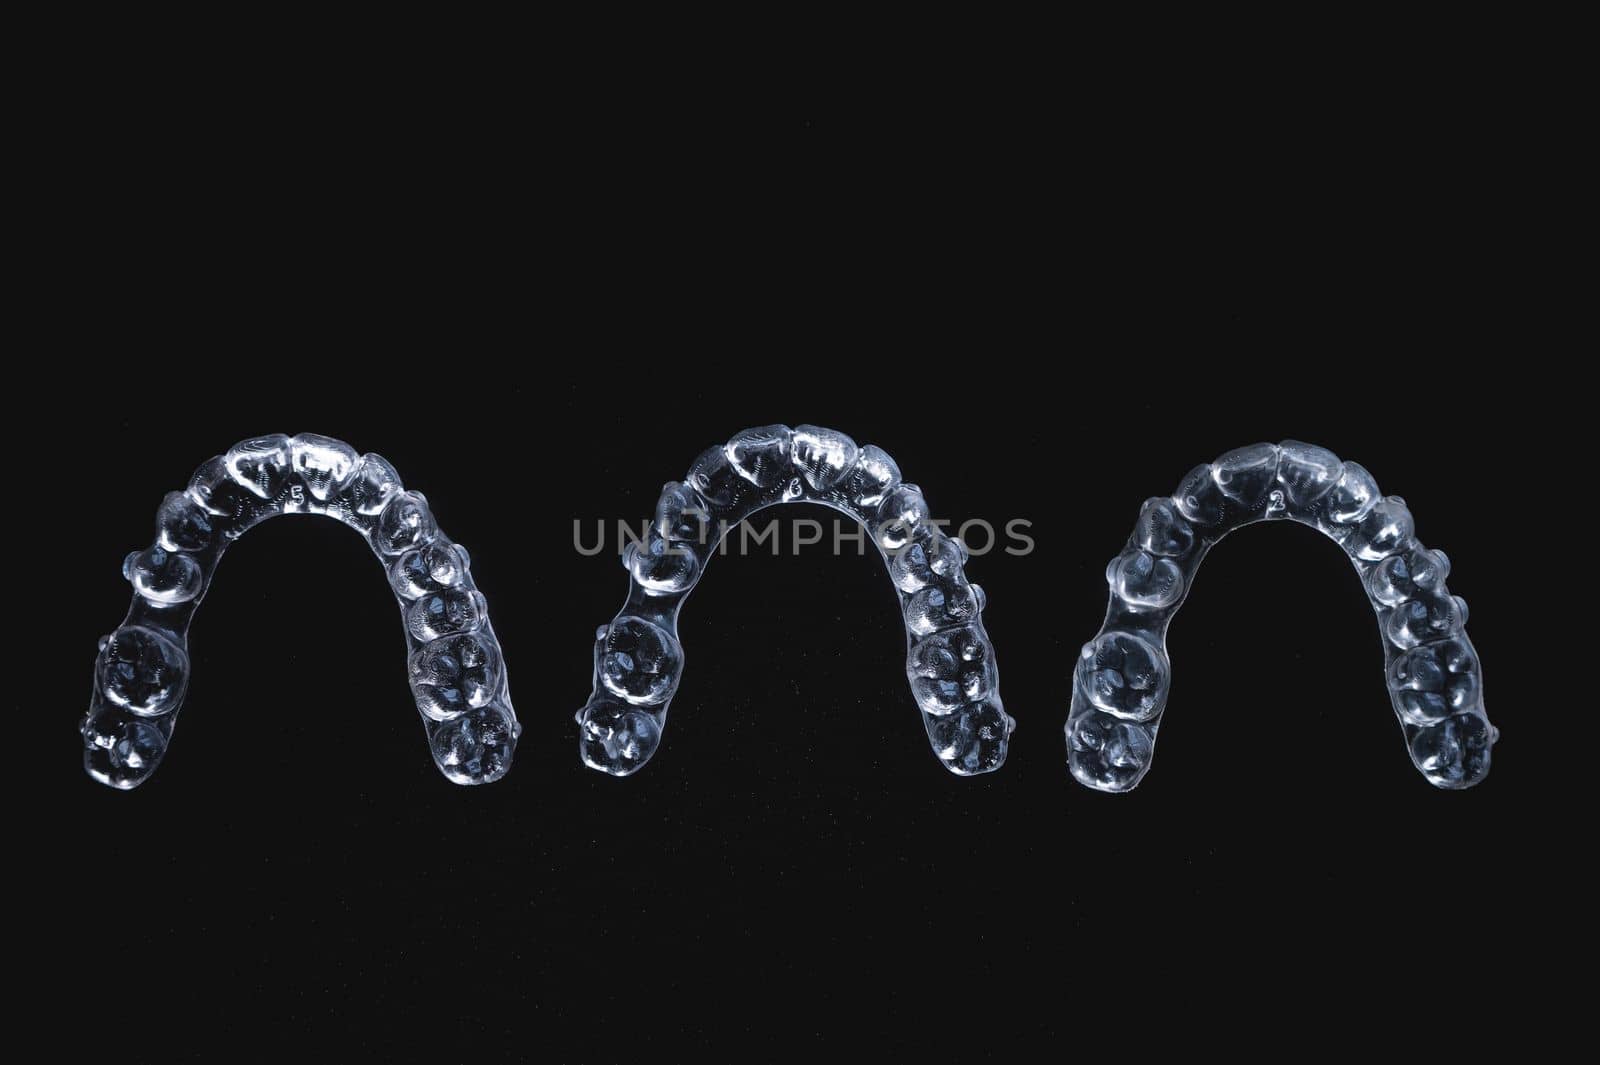 three invisible plastic aligners lie next to each other on a black background by yanik88